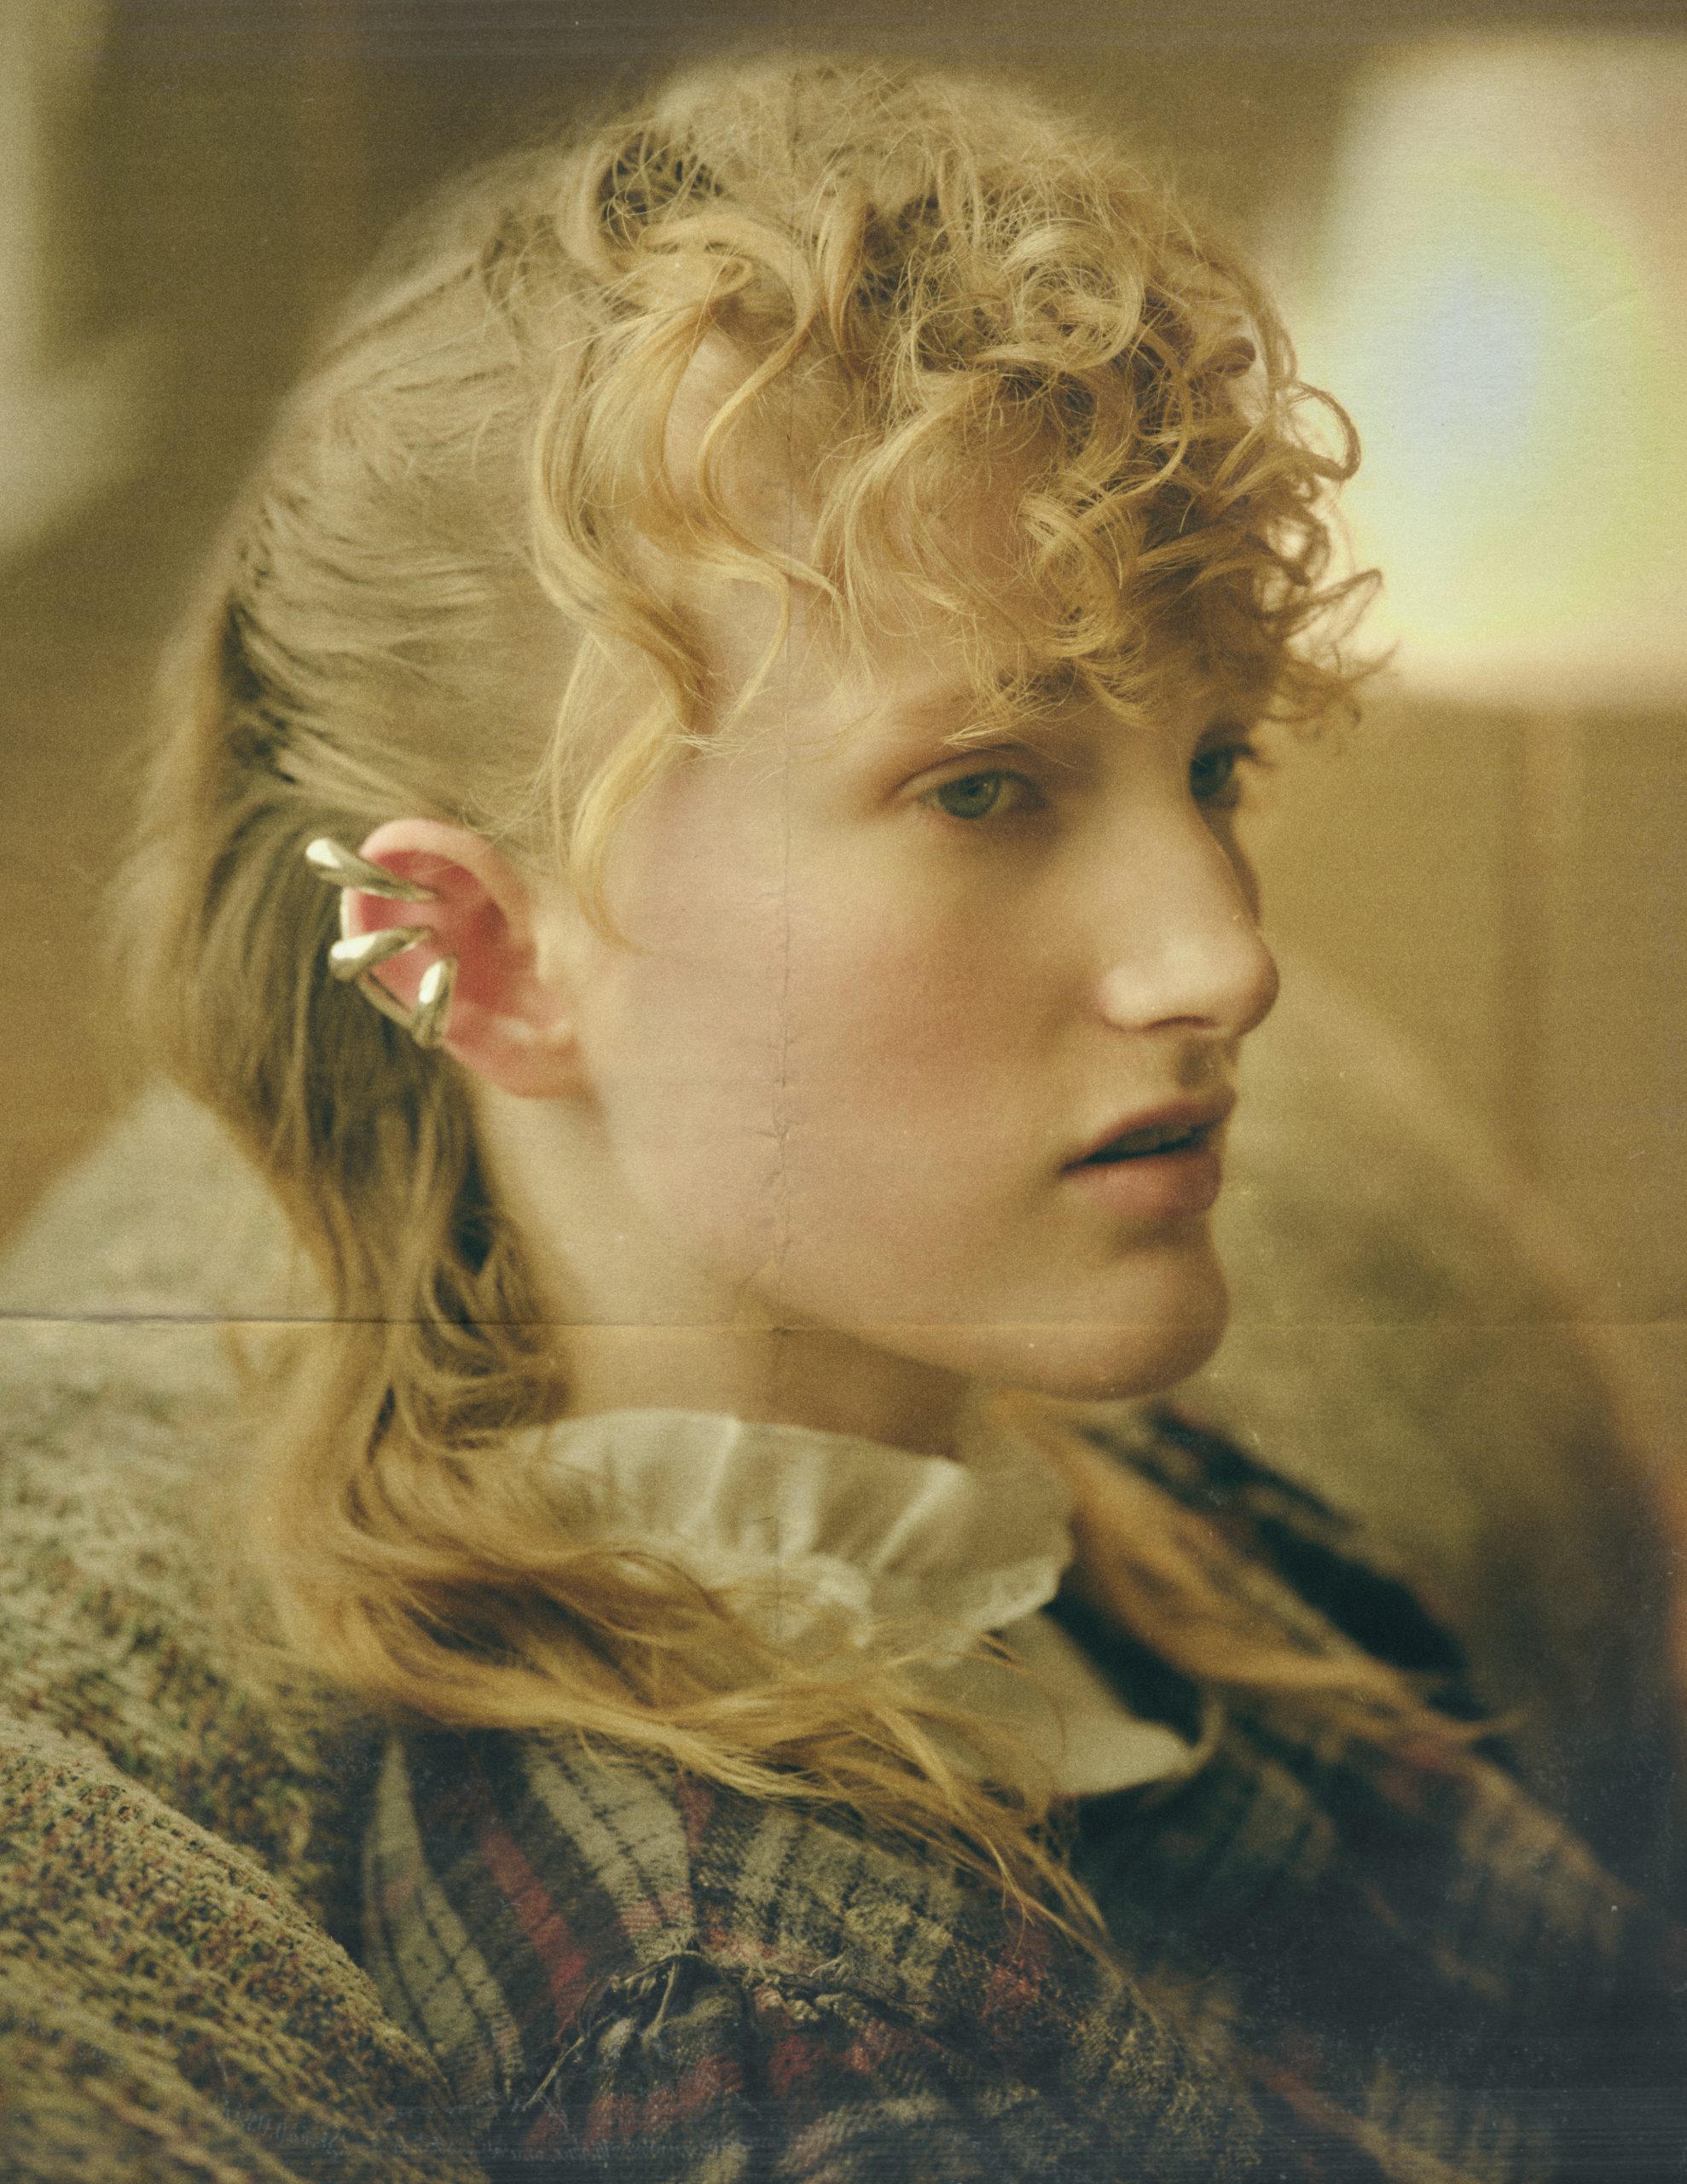 woman with blonde curly hair and silver earcuffs